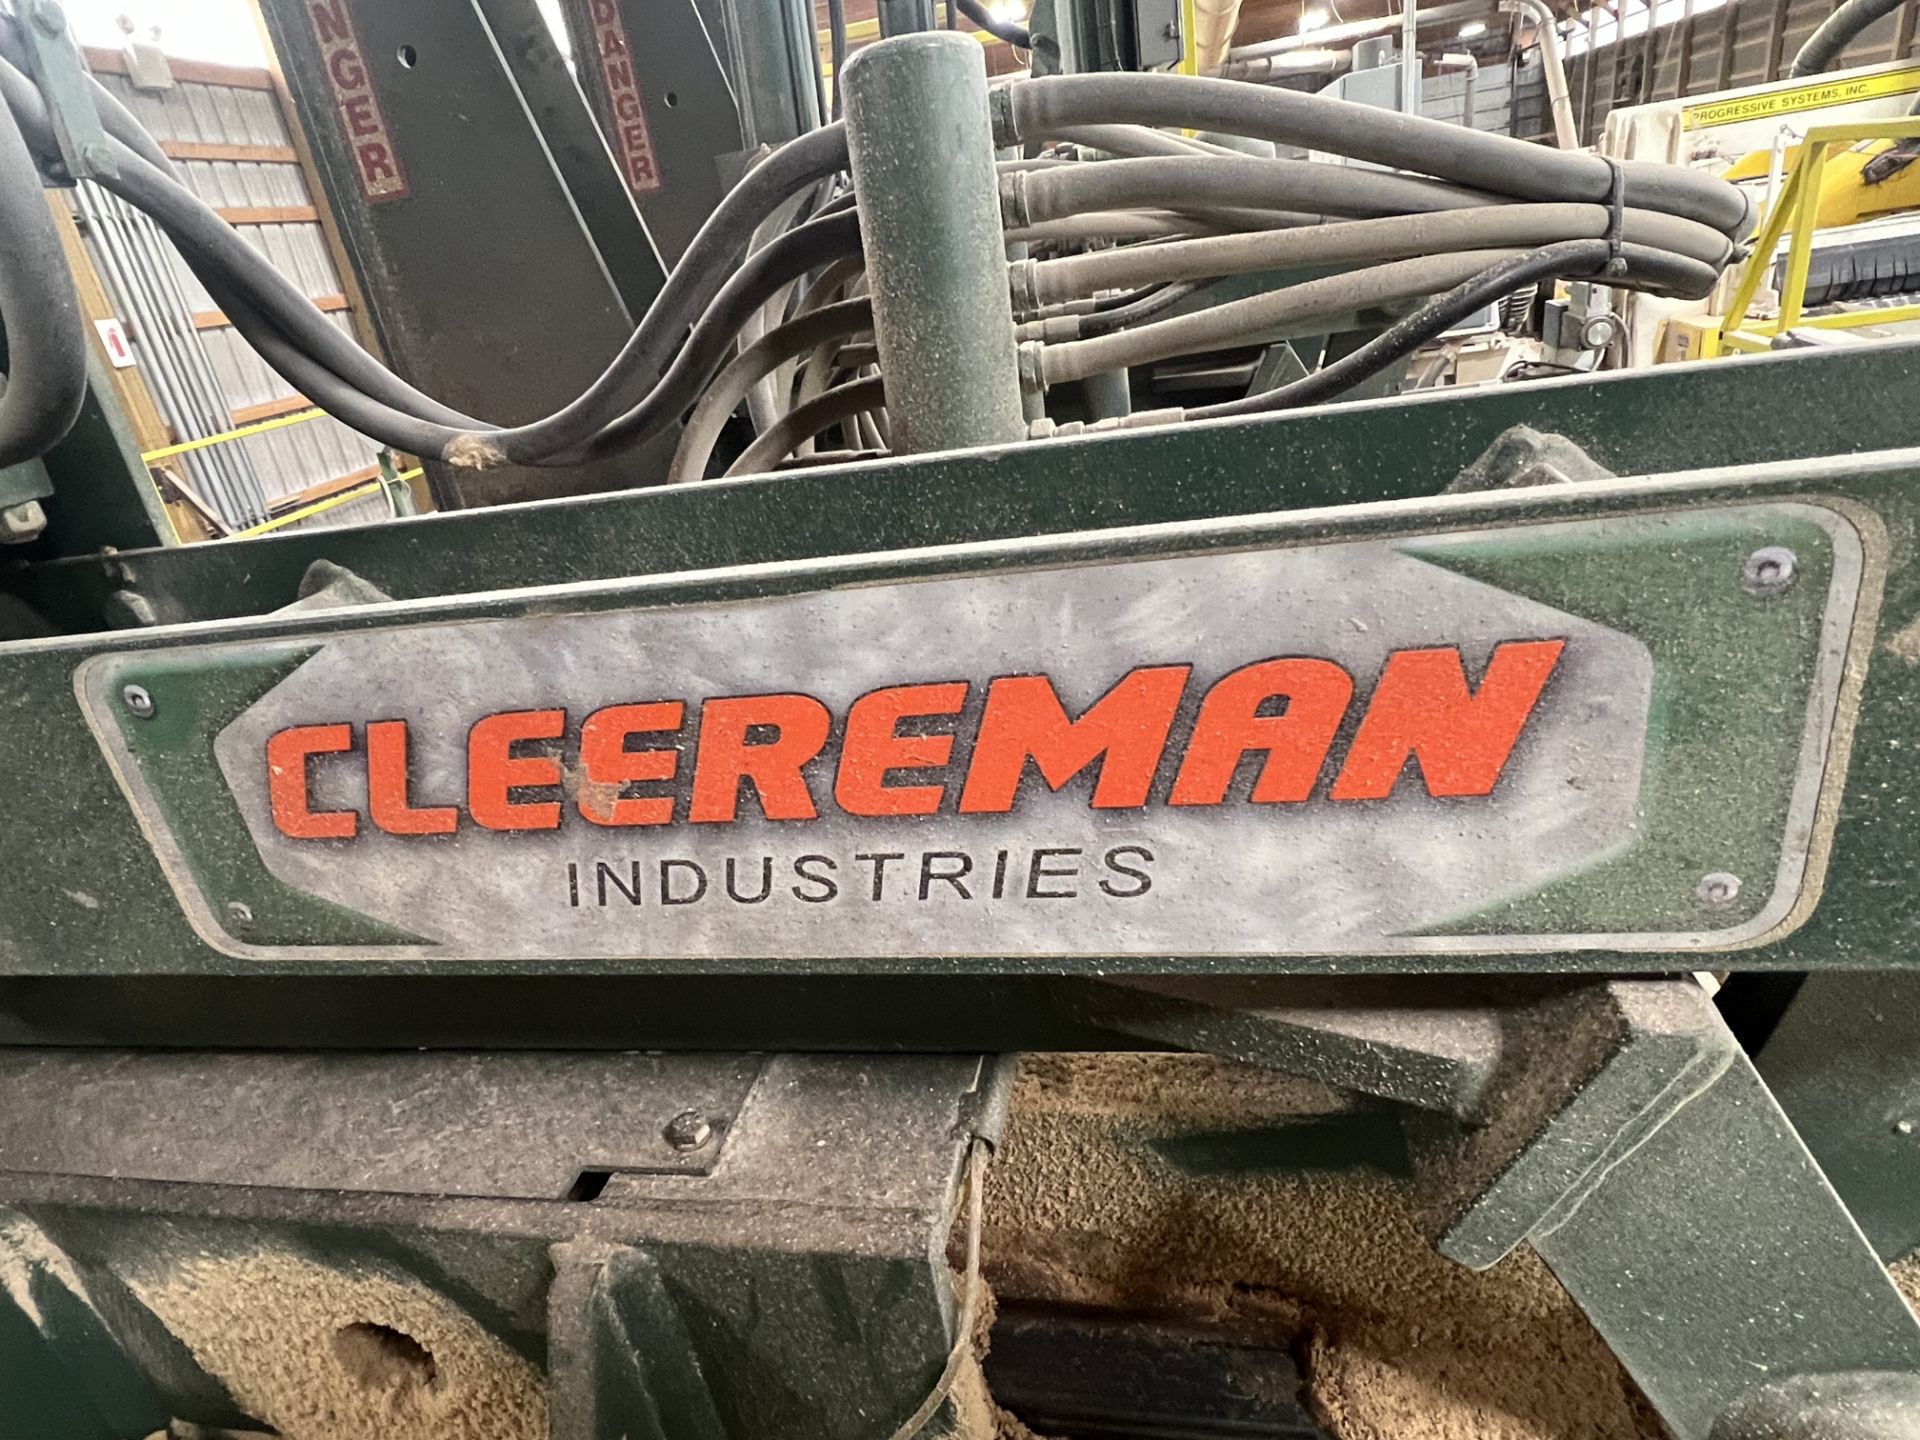 2015 Clearman/PHL 48" Vertical Band Saw Mill - Image 9 of 16